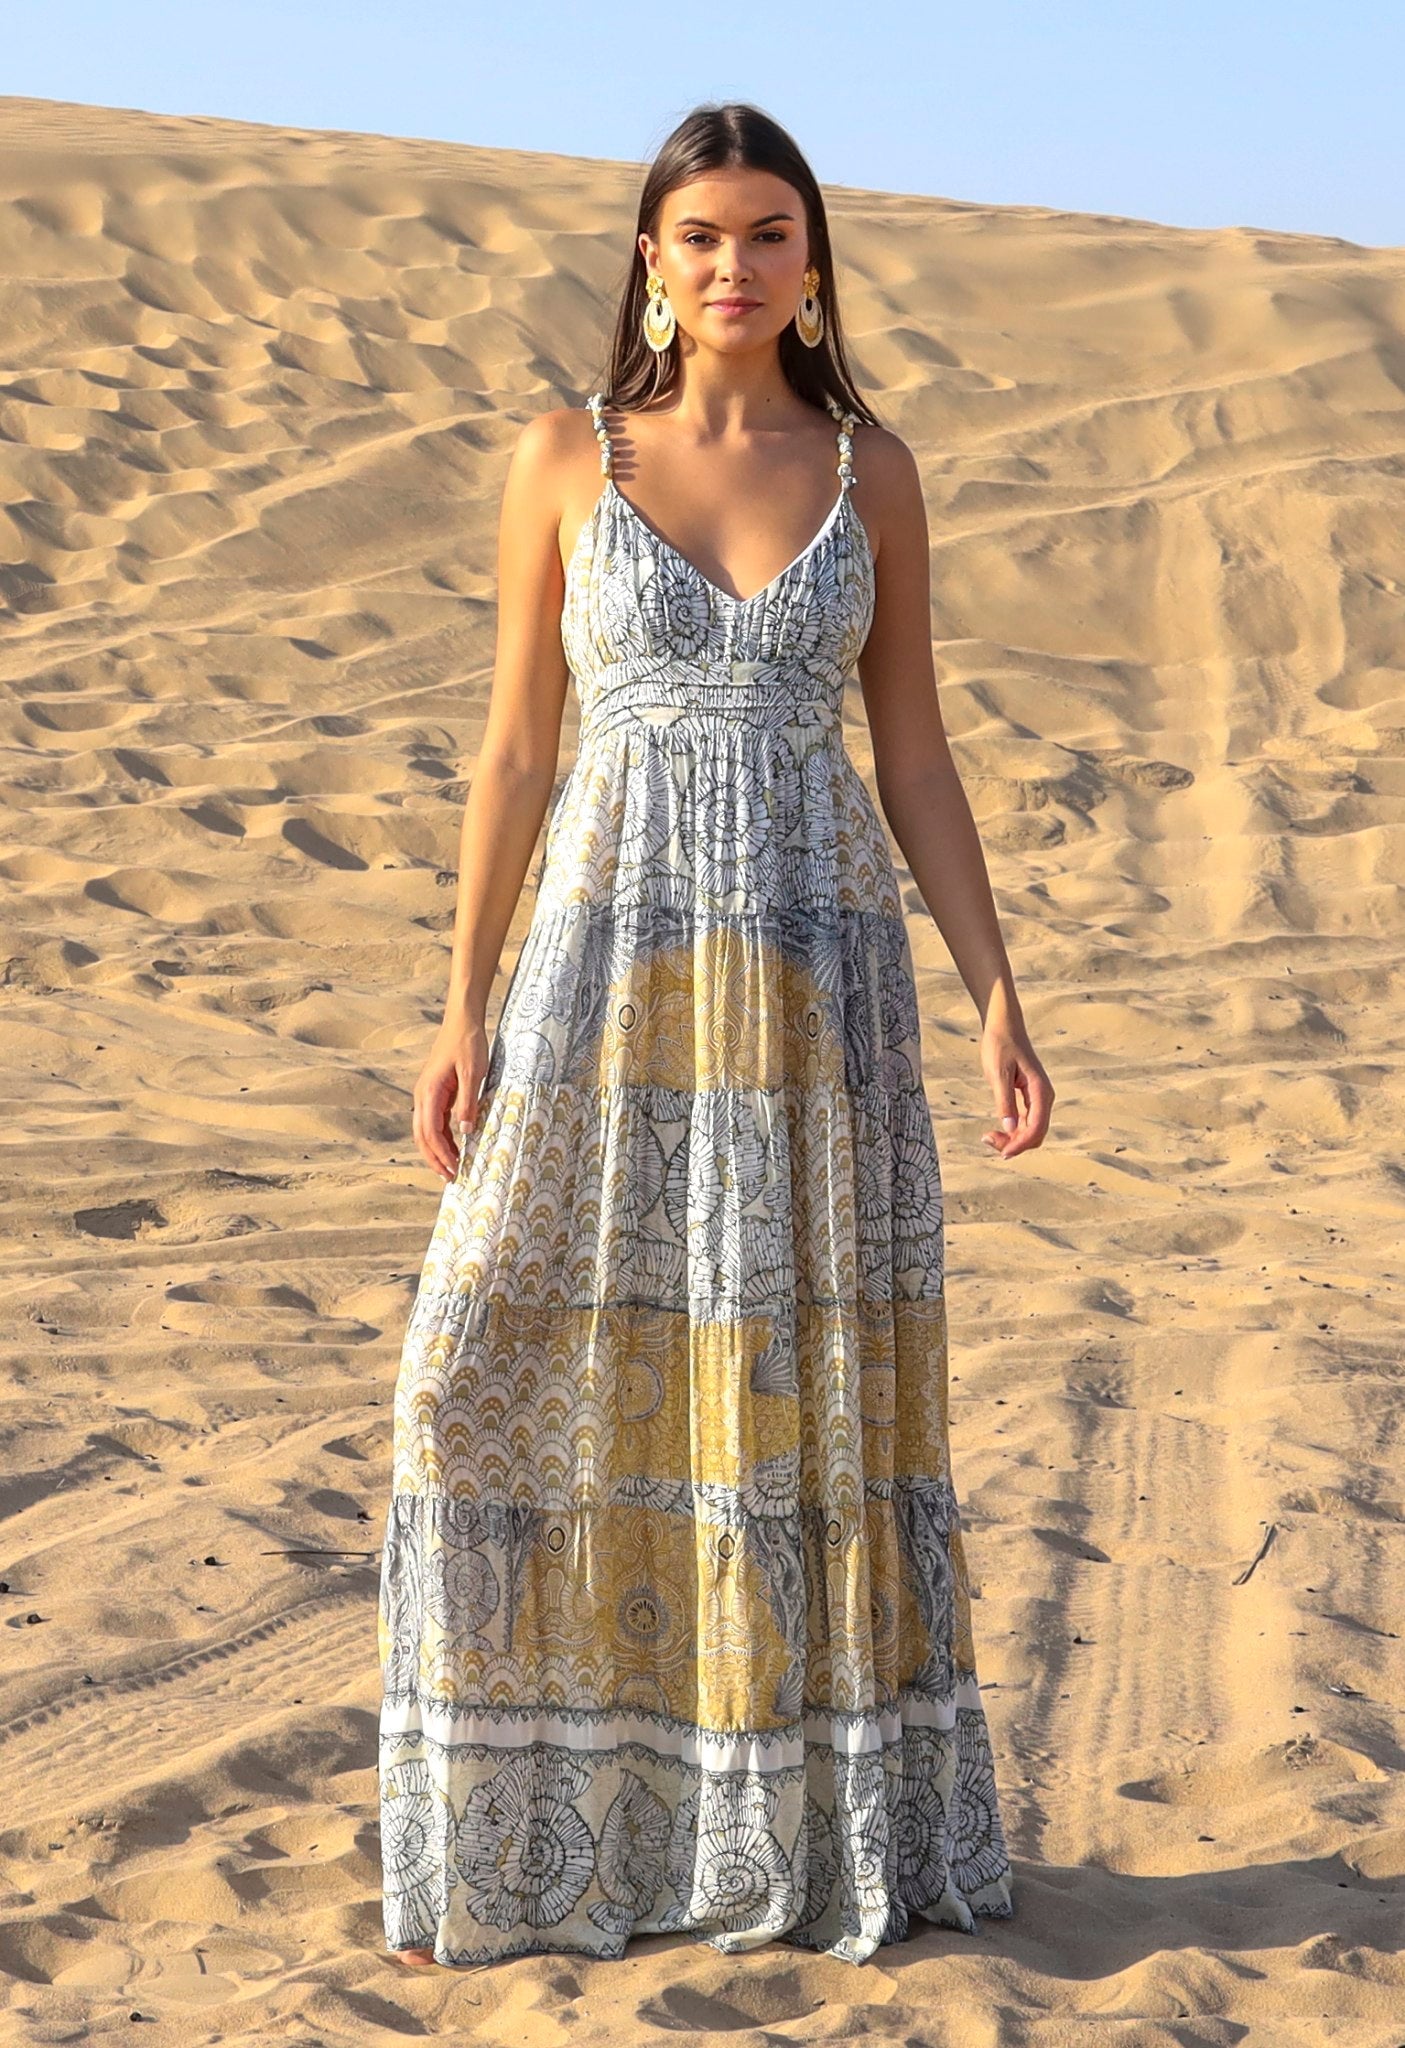 Maxi Sundial Strap Dress With Tie Belts At Back